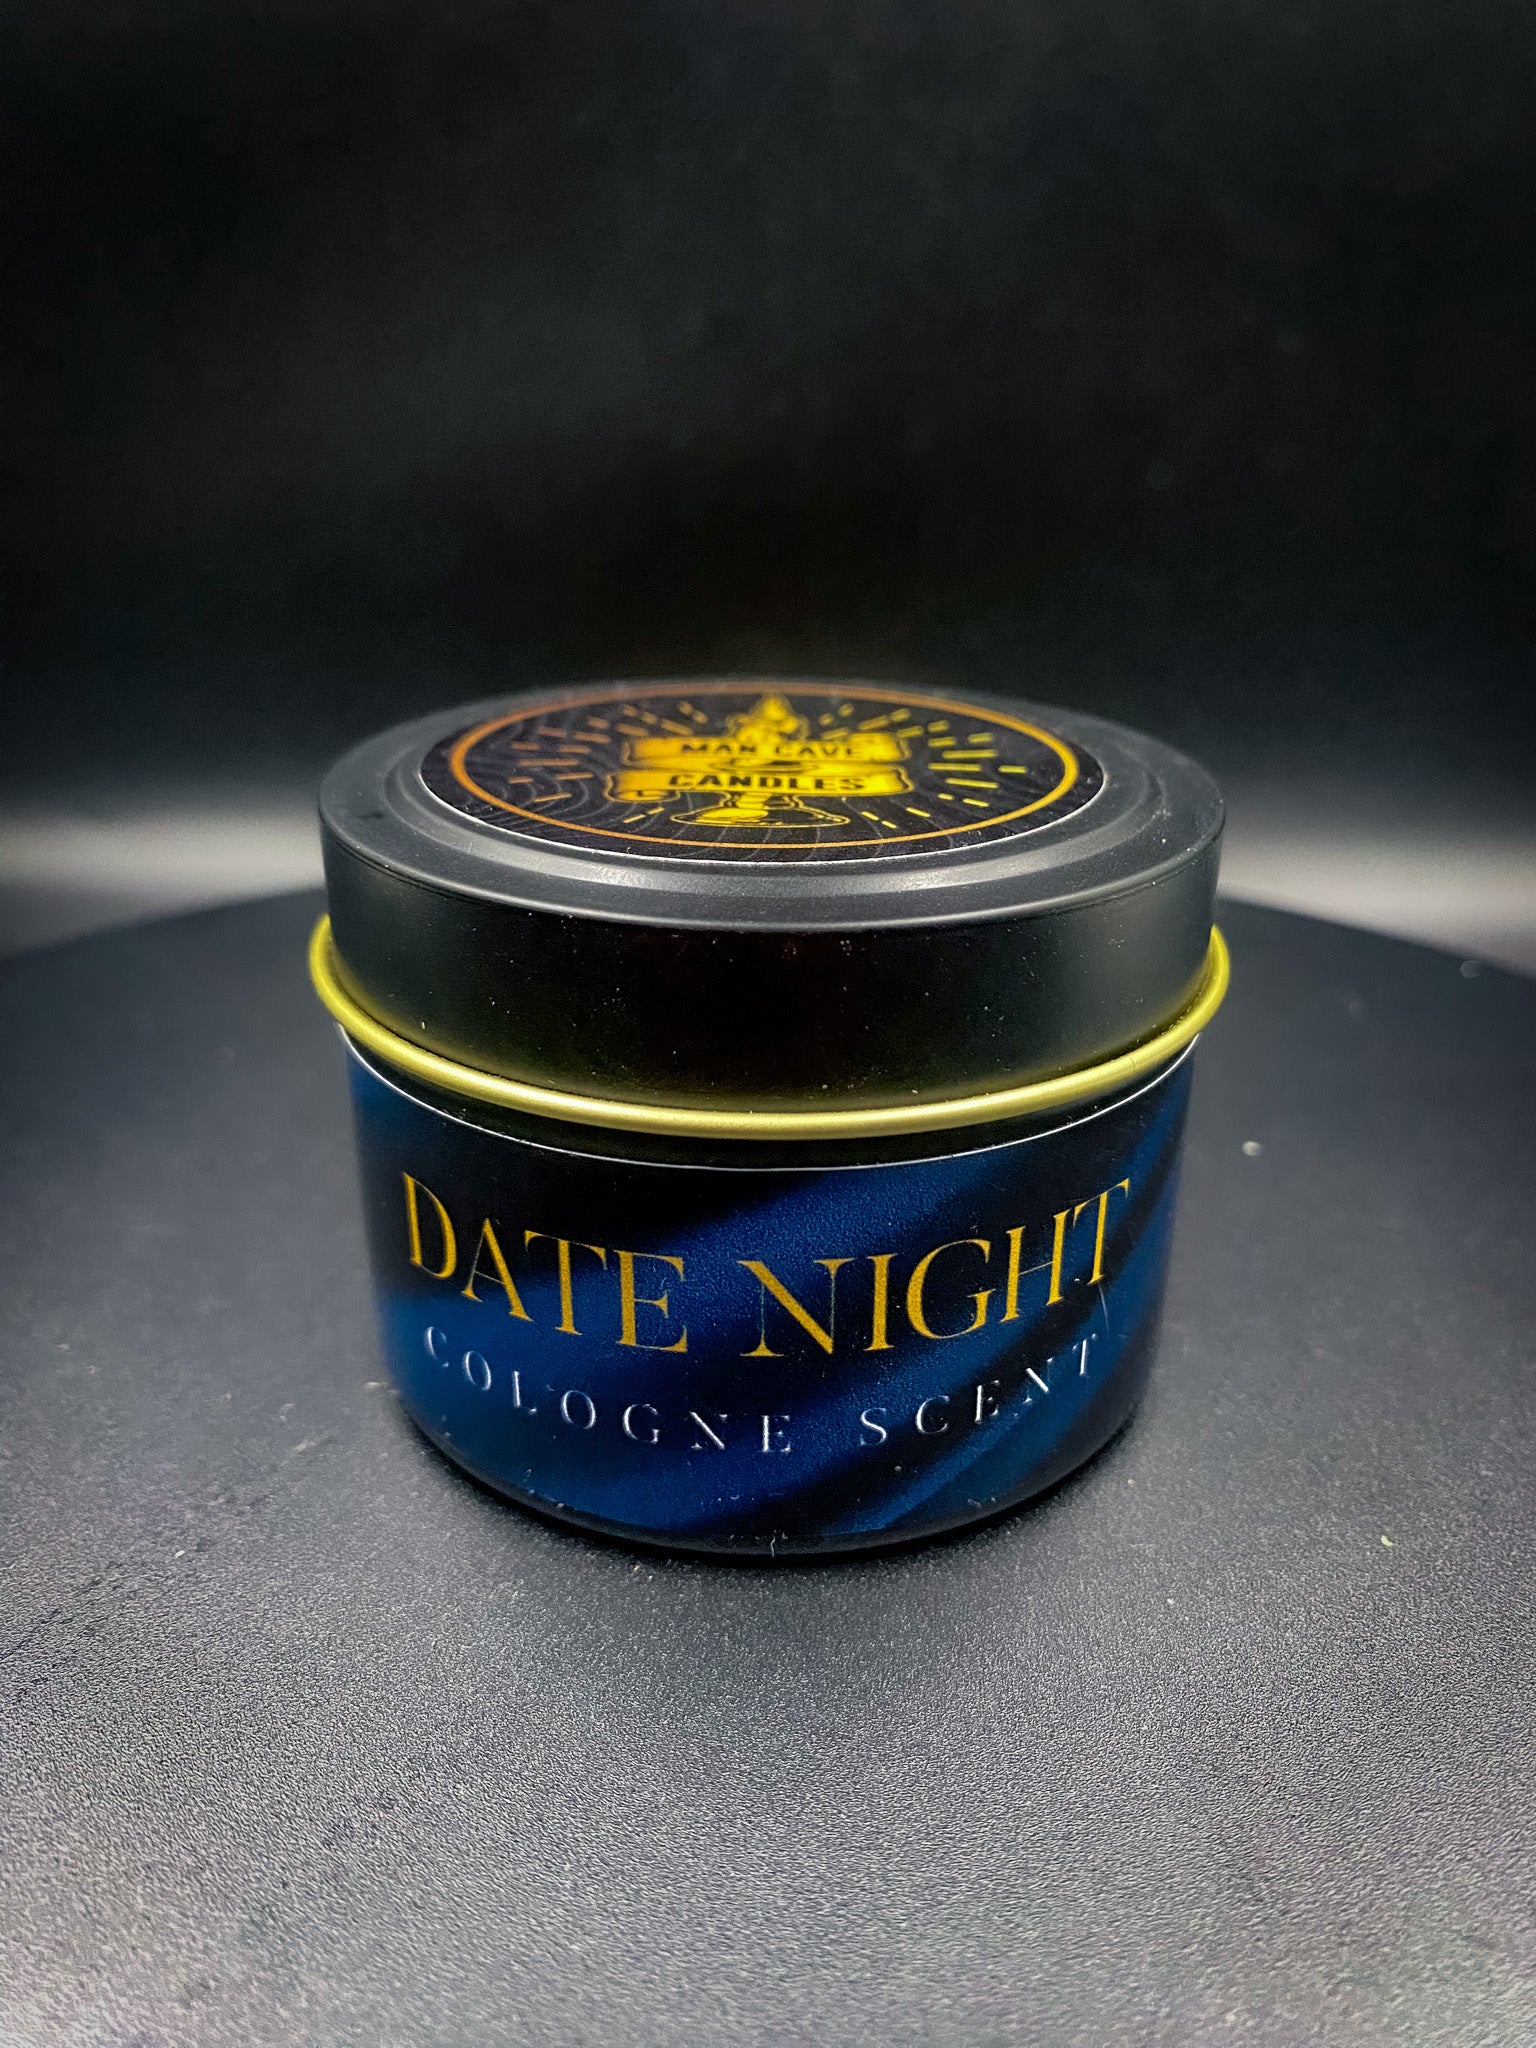 Date Night - Cologne Scented Man Cave Candle